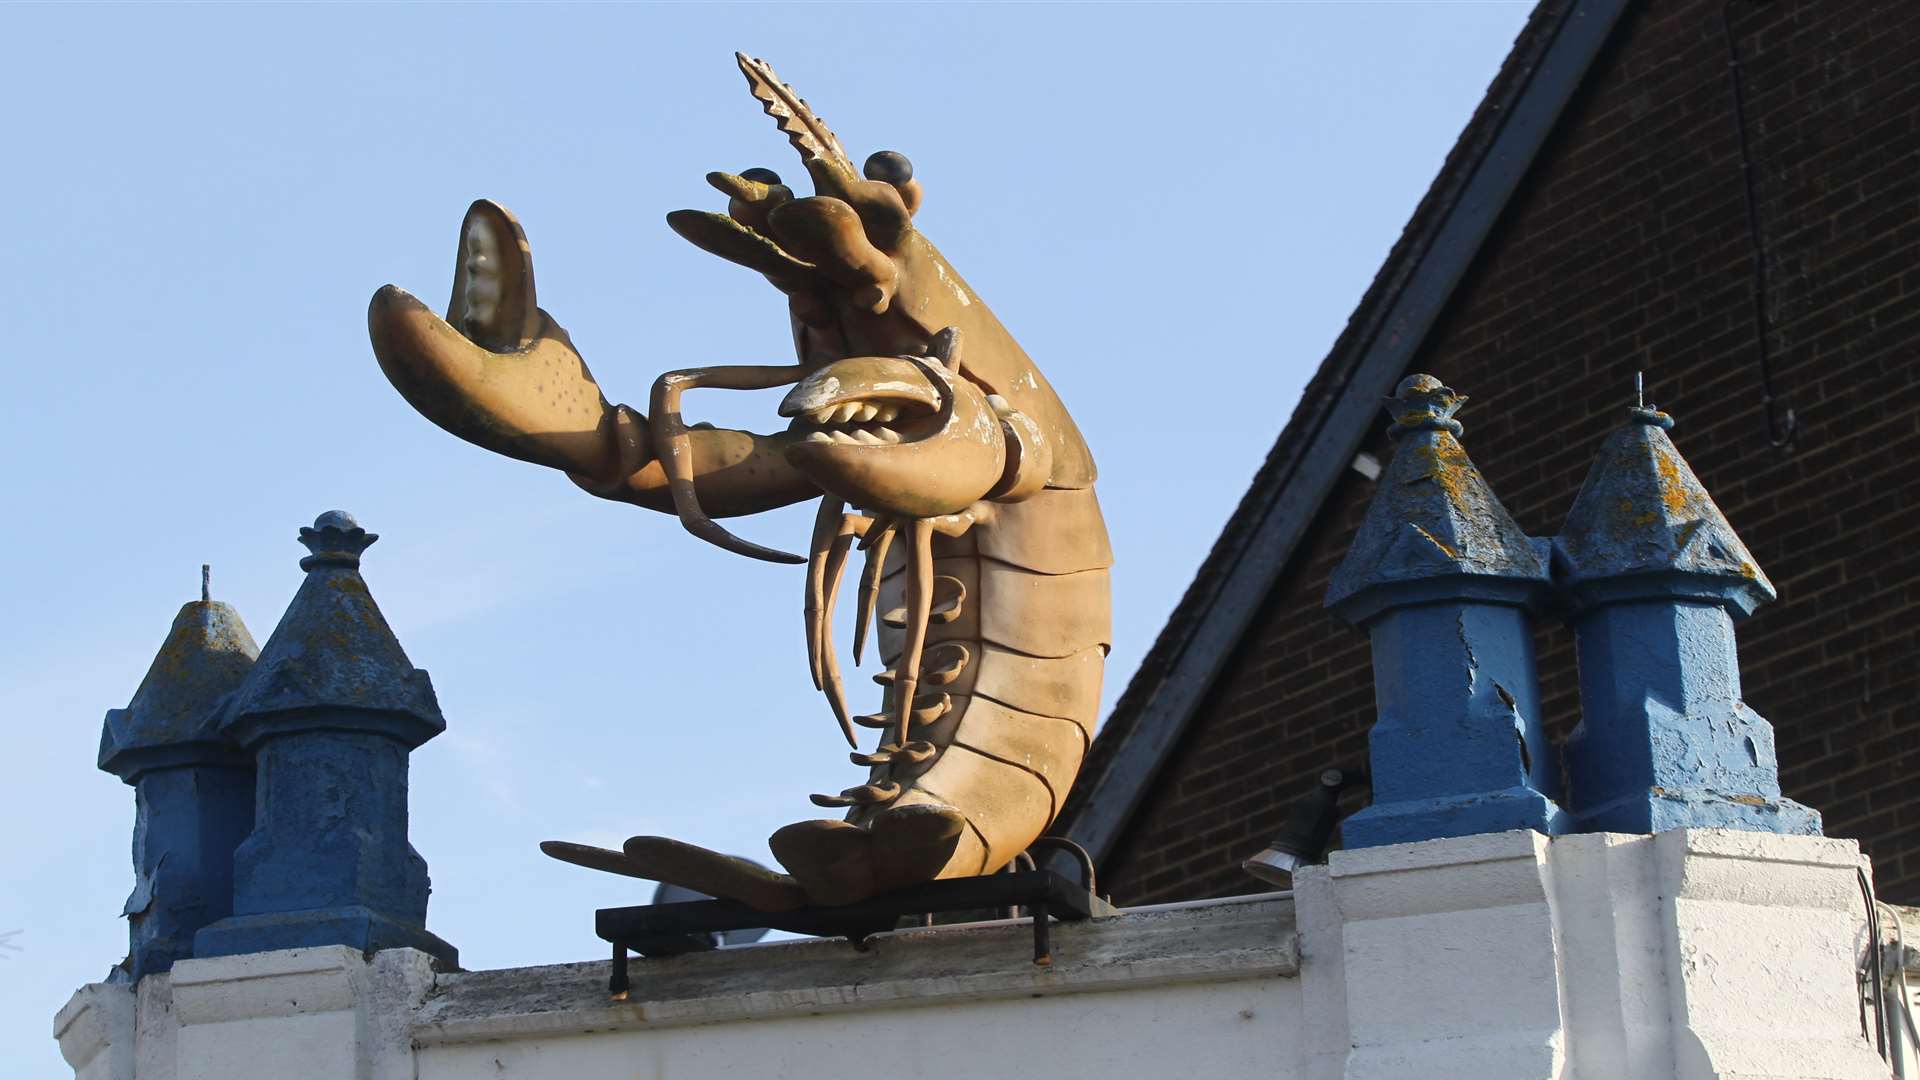 The giant lobster on the Island Bait and tackle shop in Halfway